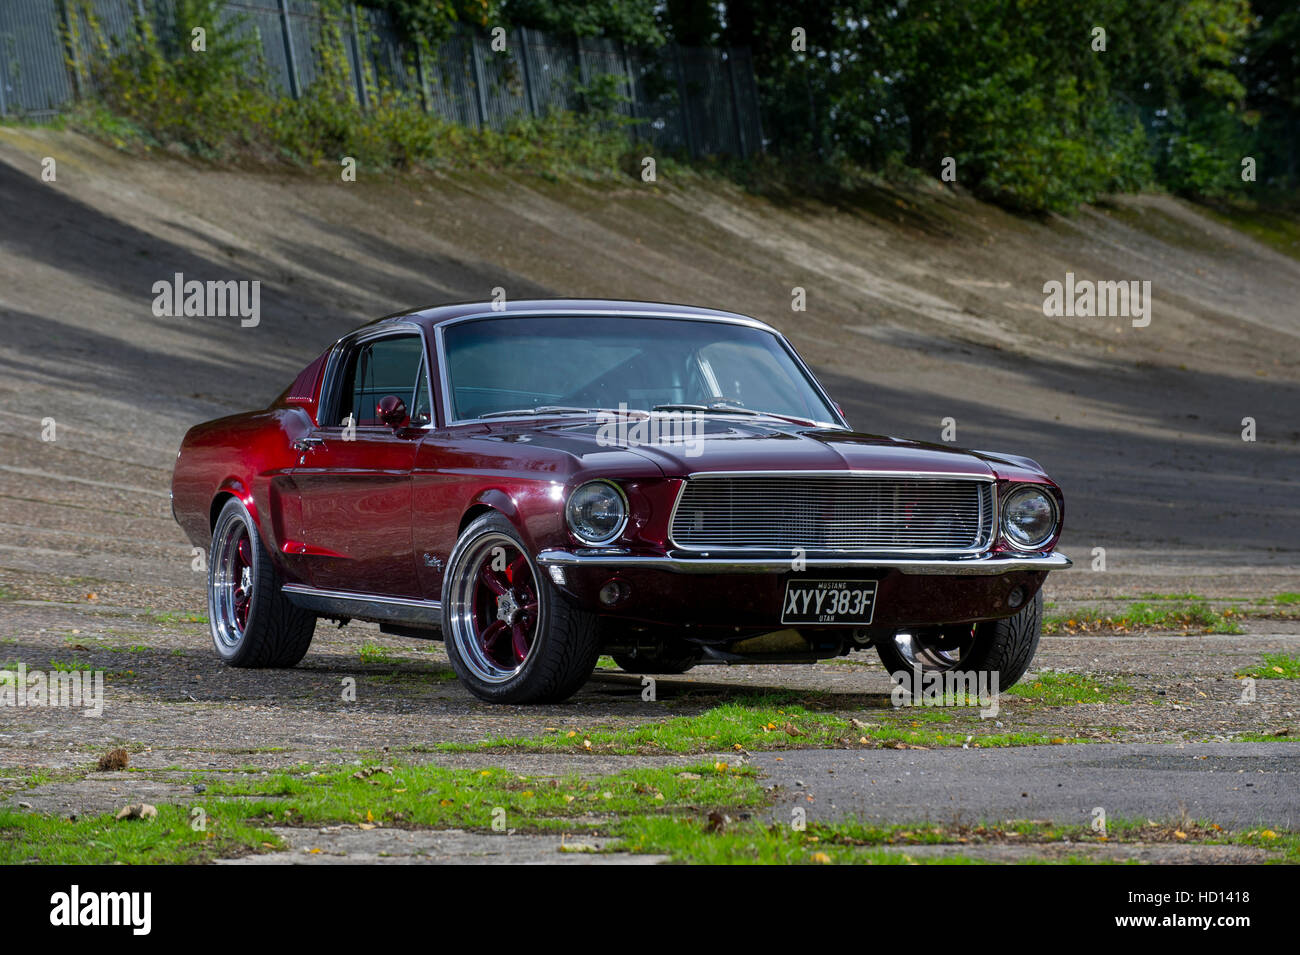 Ford Mach 1 Mustang GT classic American sports car Stock Photo